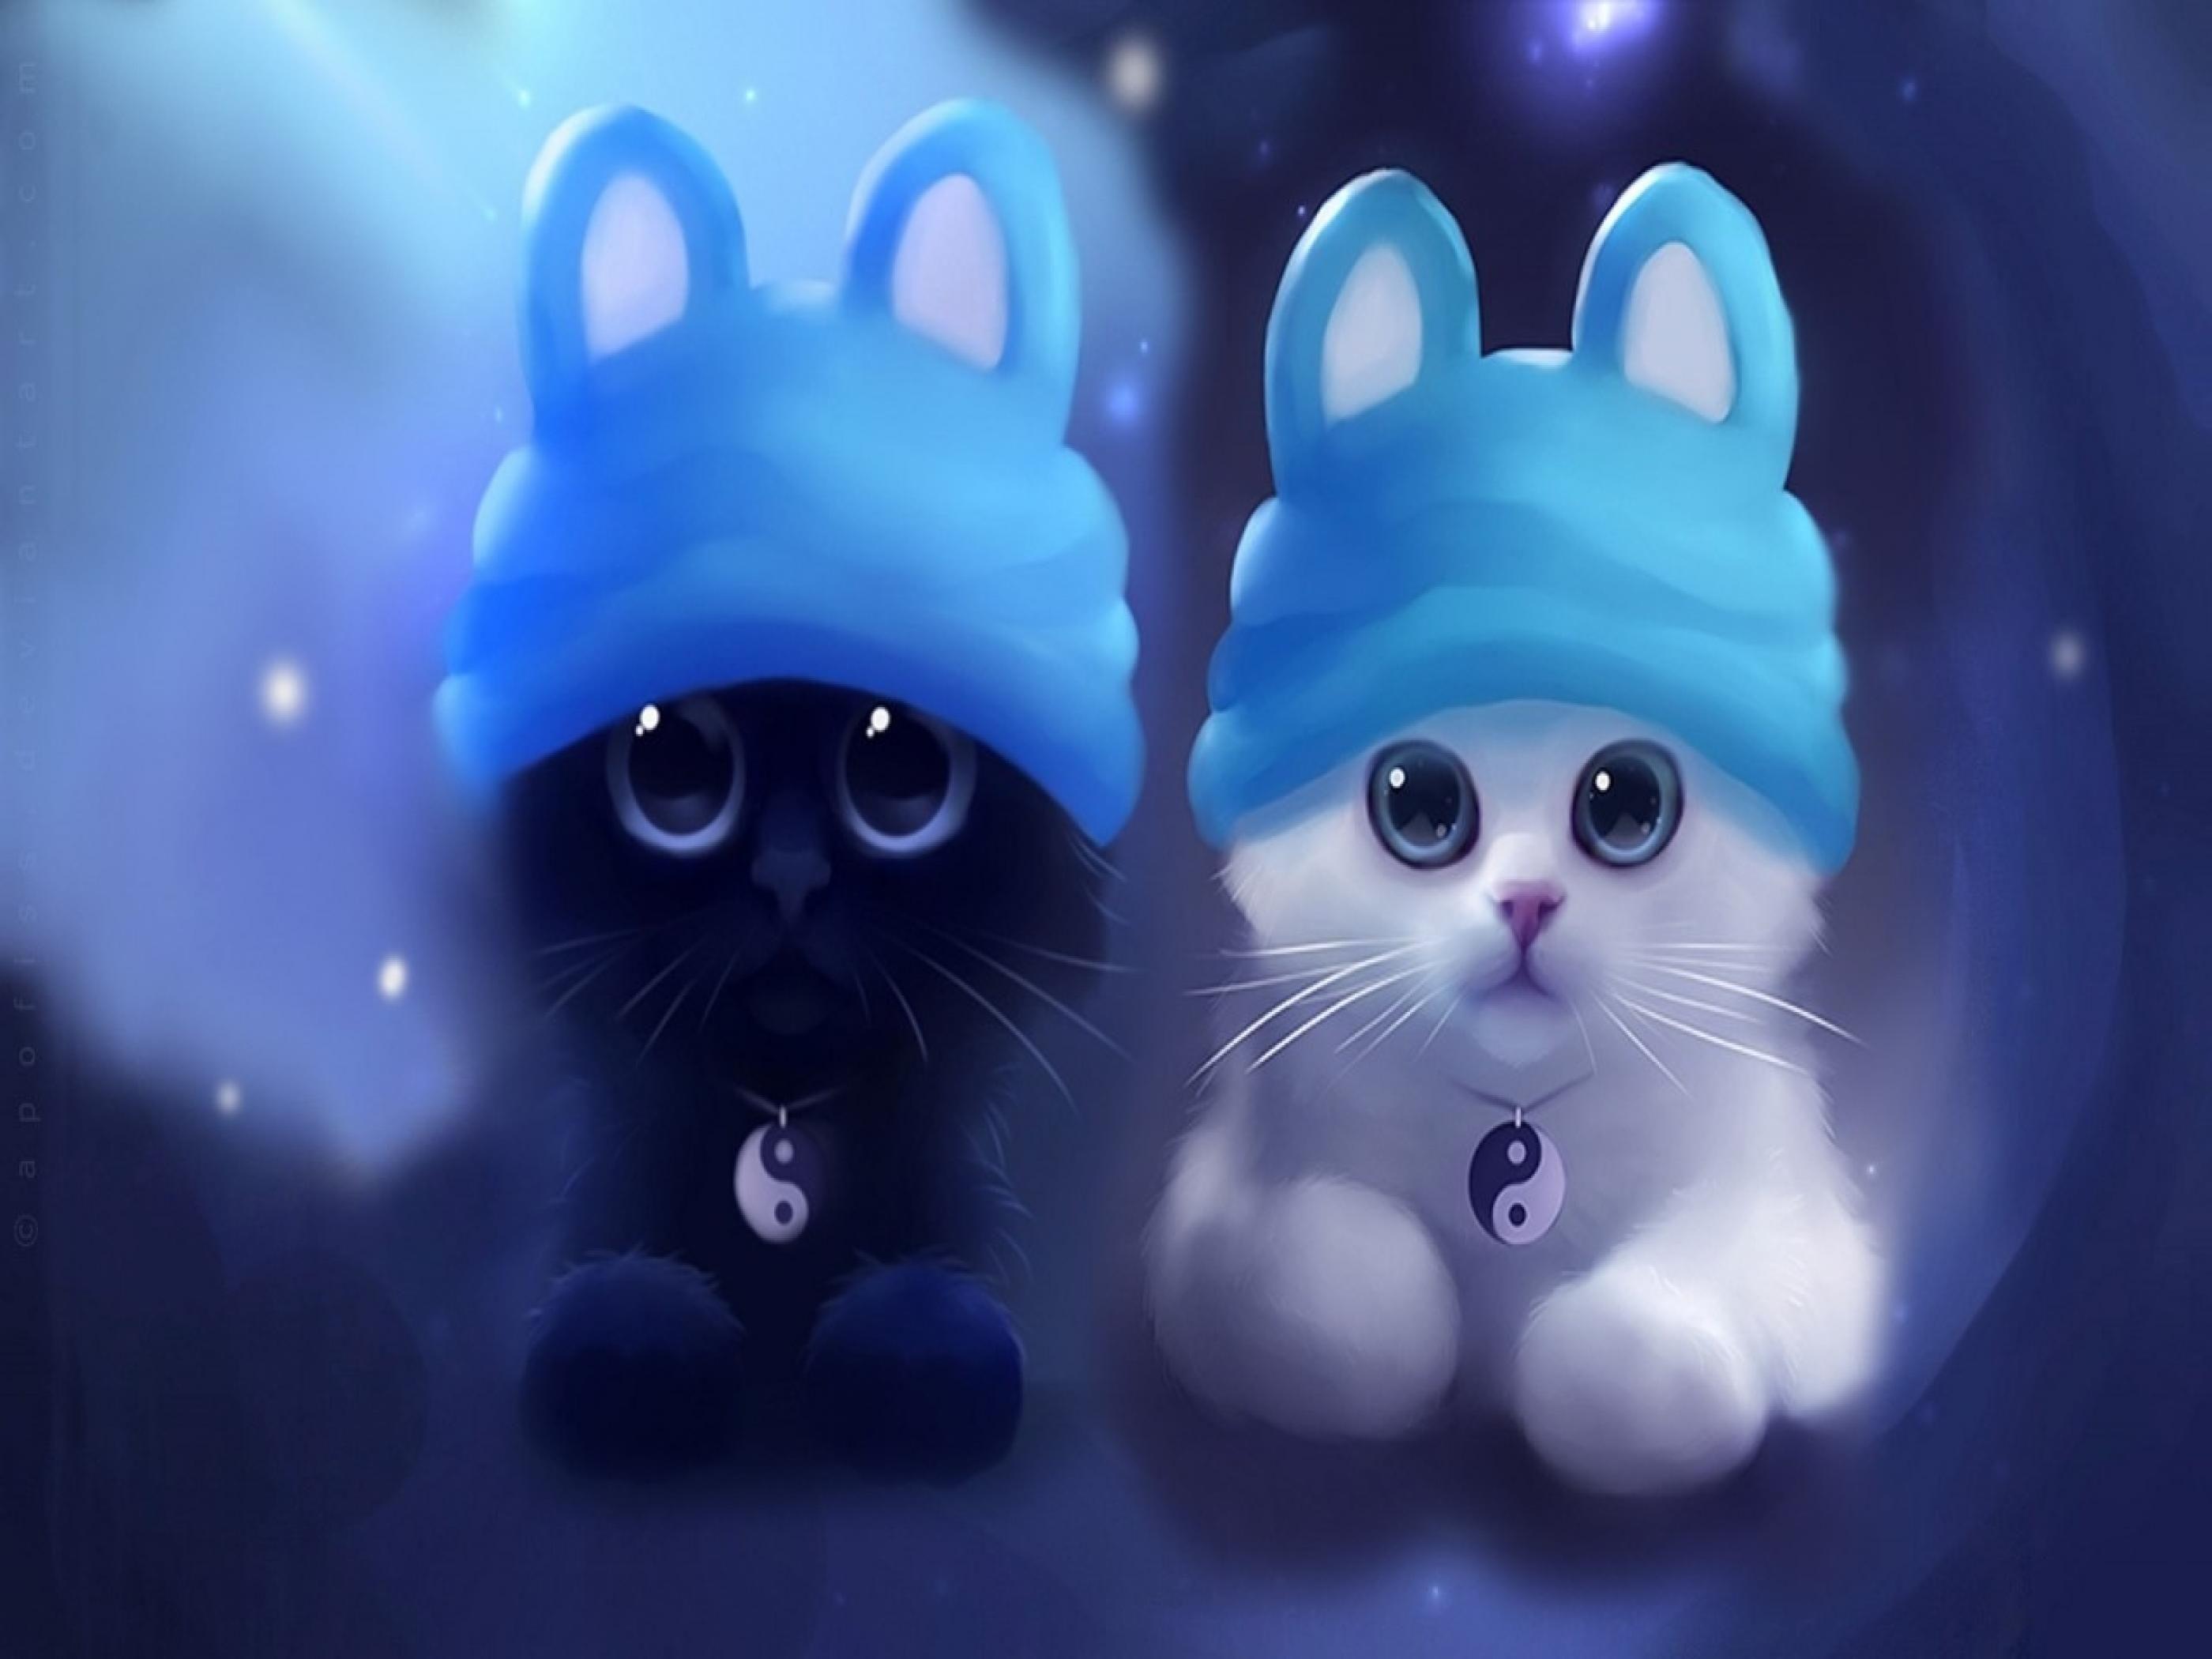 Adorable Anime Cat Wallpapers - Top Free Adorable Anime Cat Backgrounds